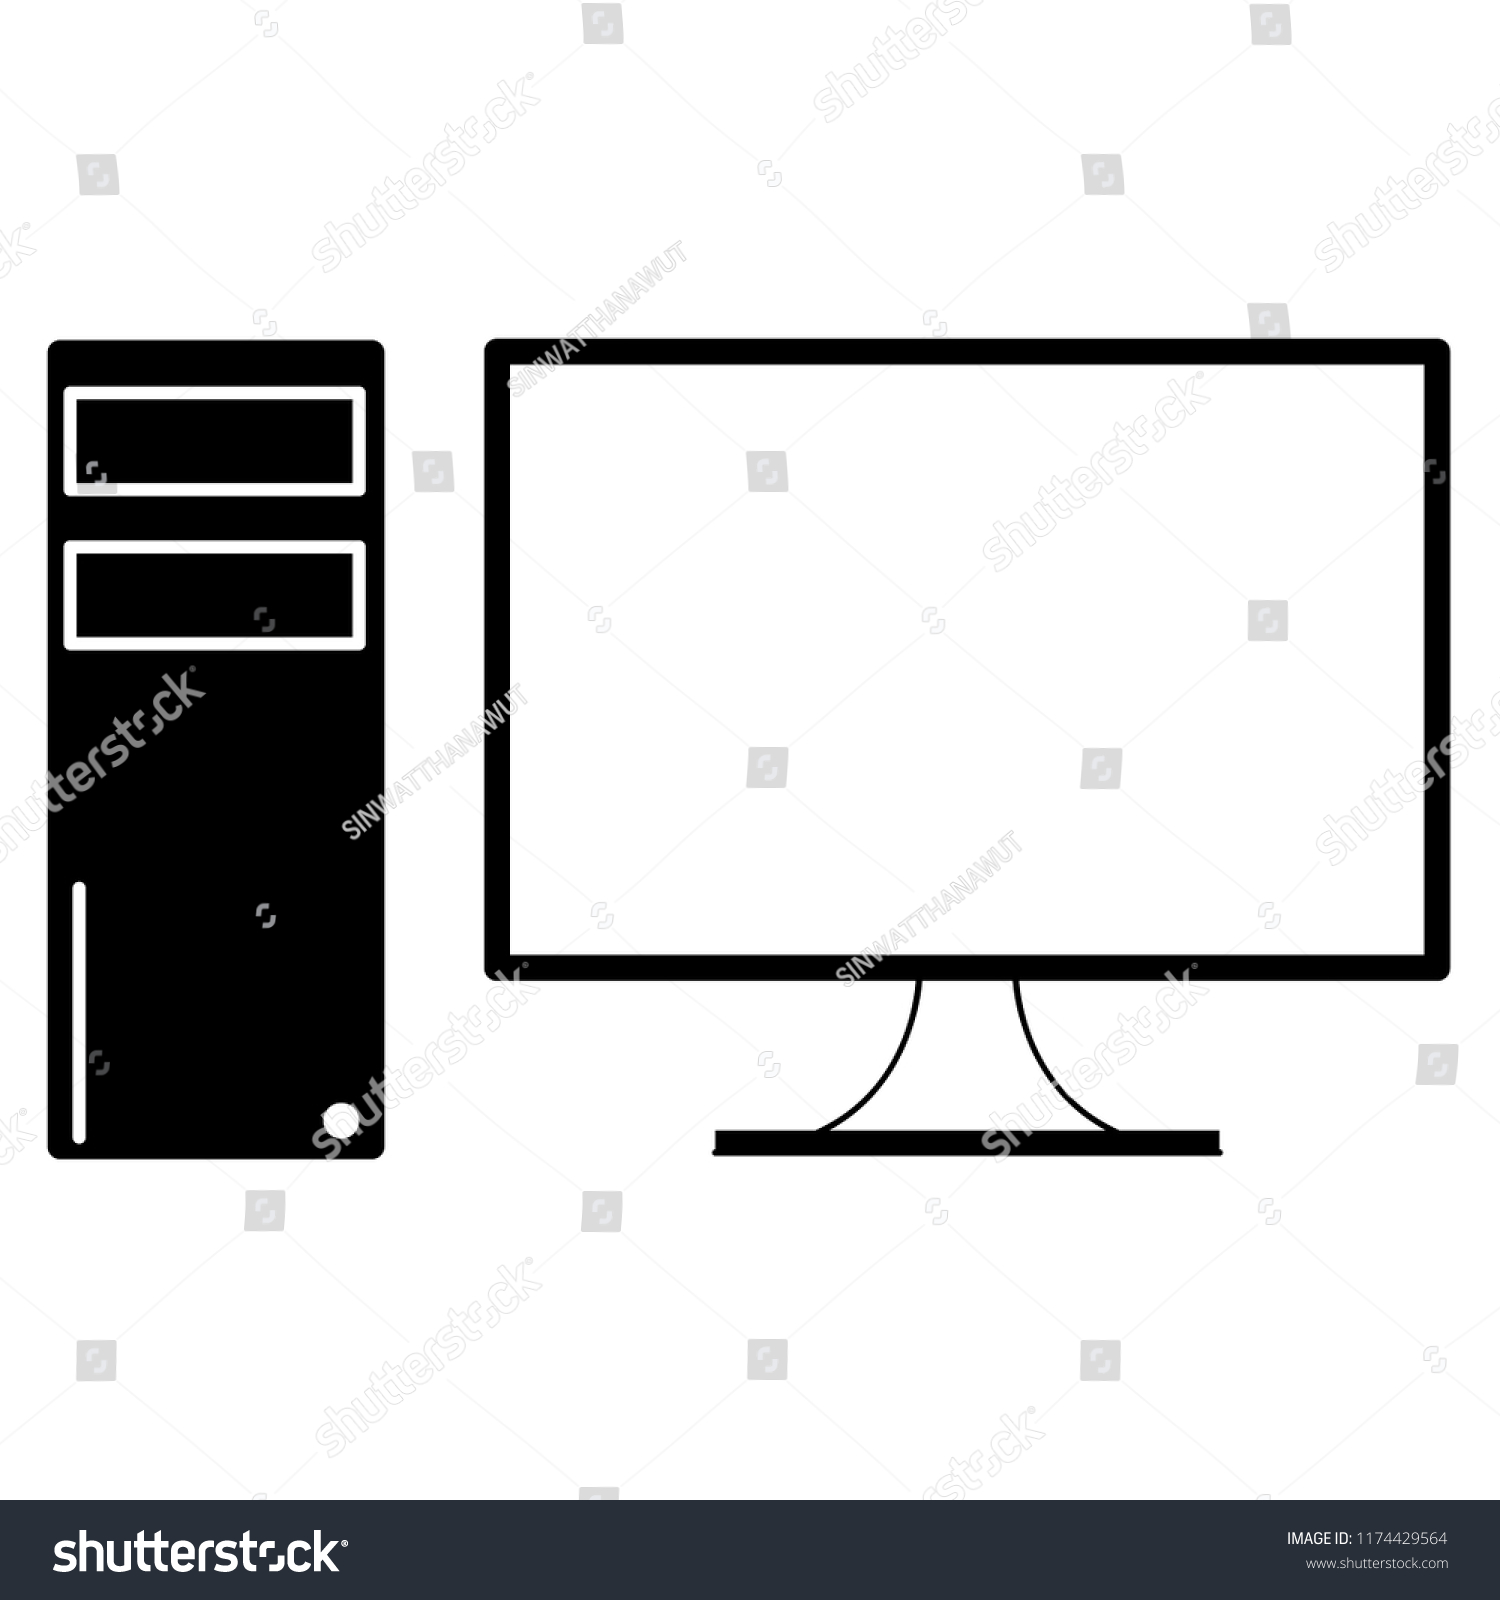 Pc Computer Front Icon Vectro Illustrator Stock Vector Royalty Free